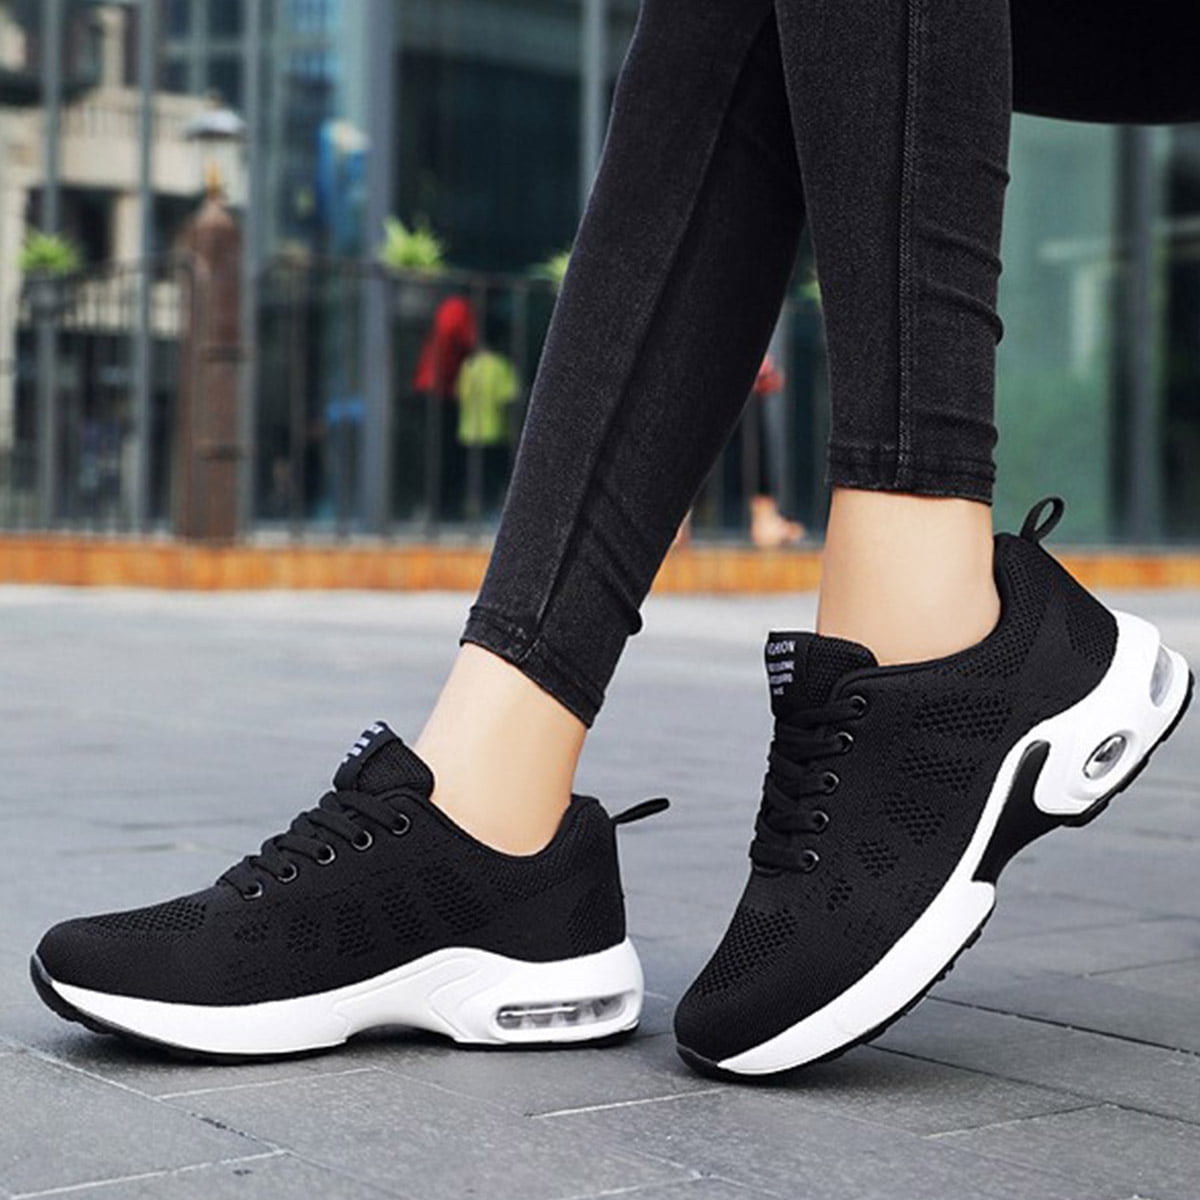 Women Fly-kint Air Cushion Breathable lightweight Sneakers Socks Trainers Shoes 